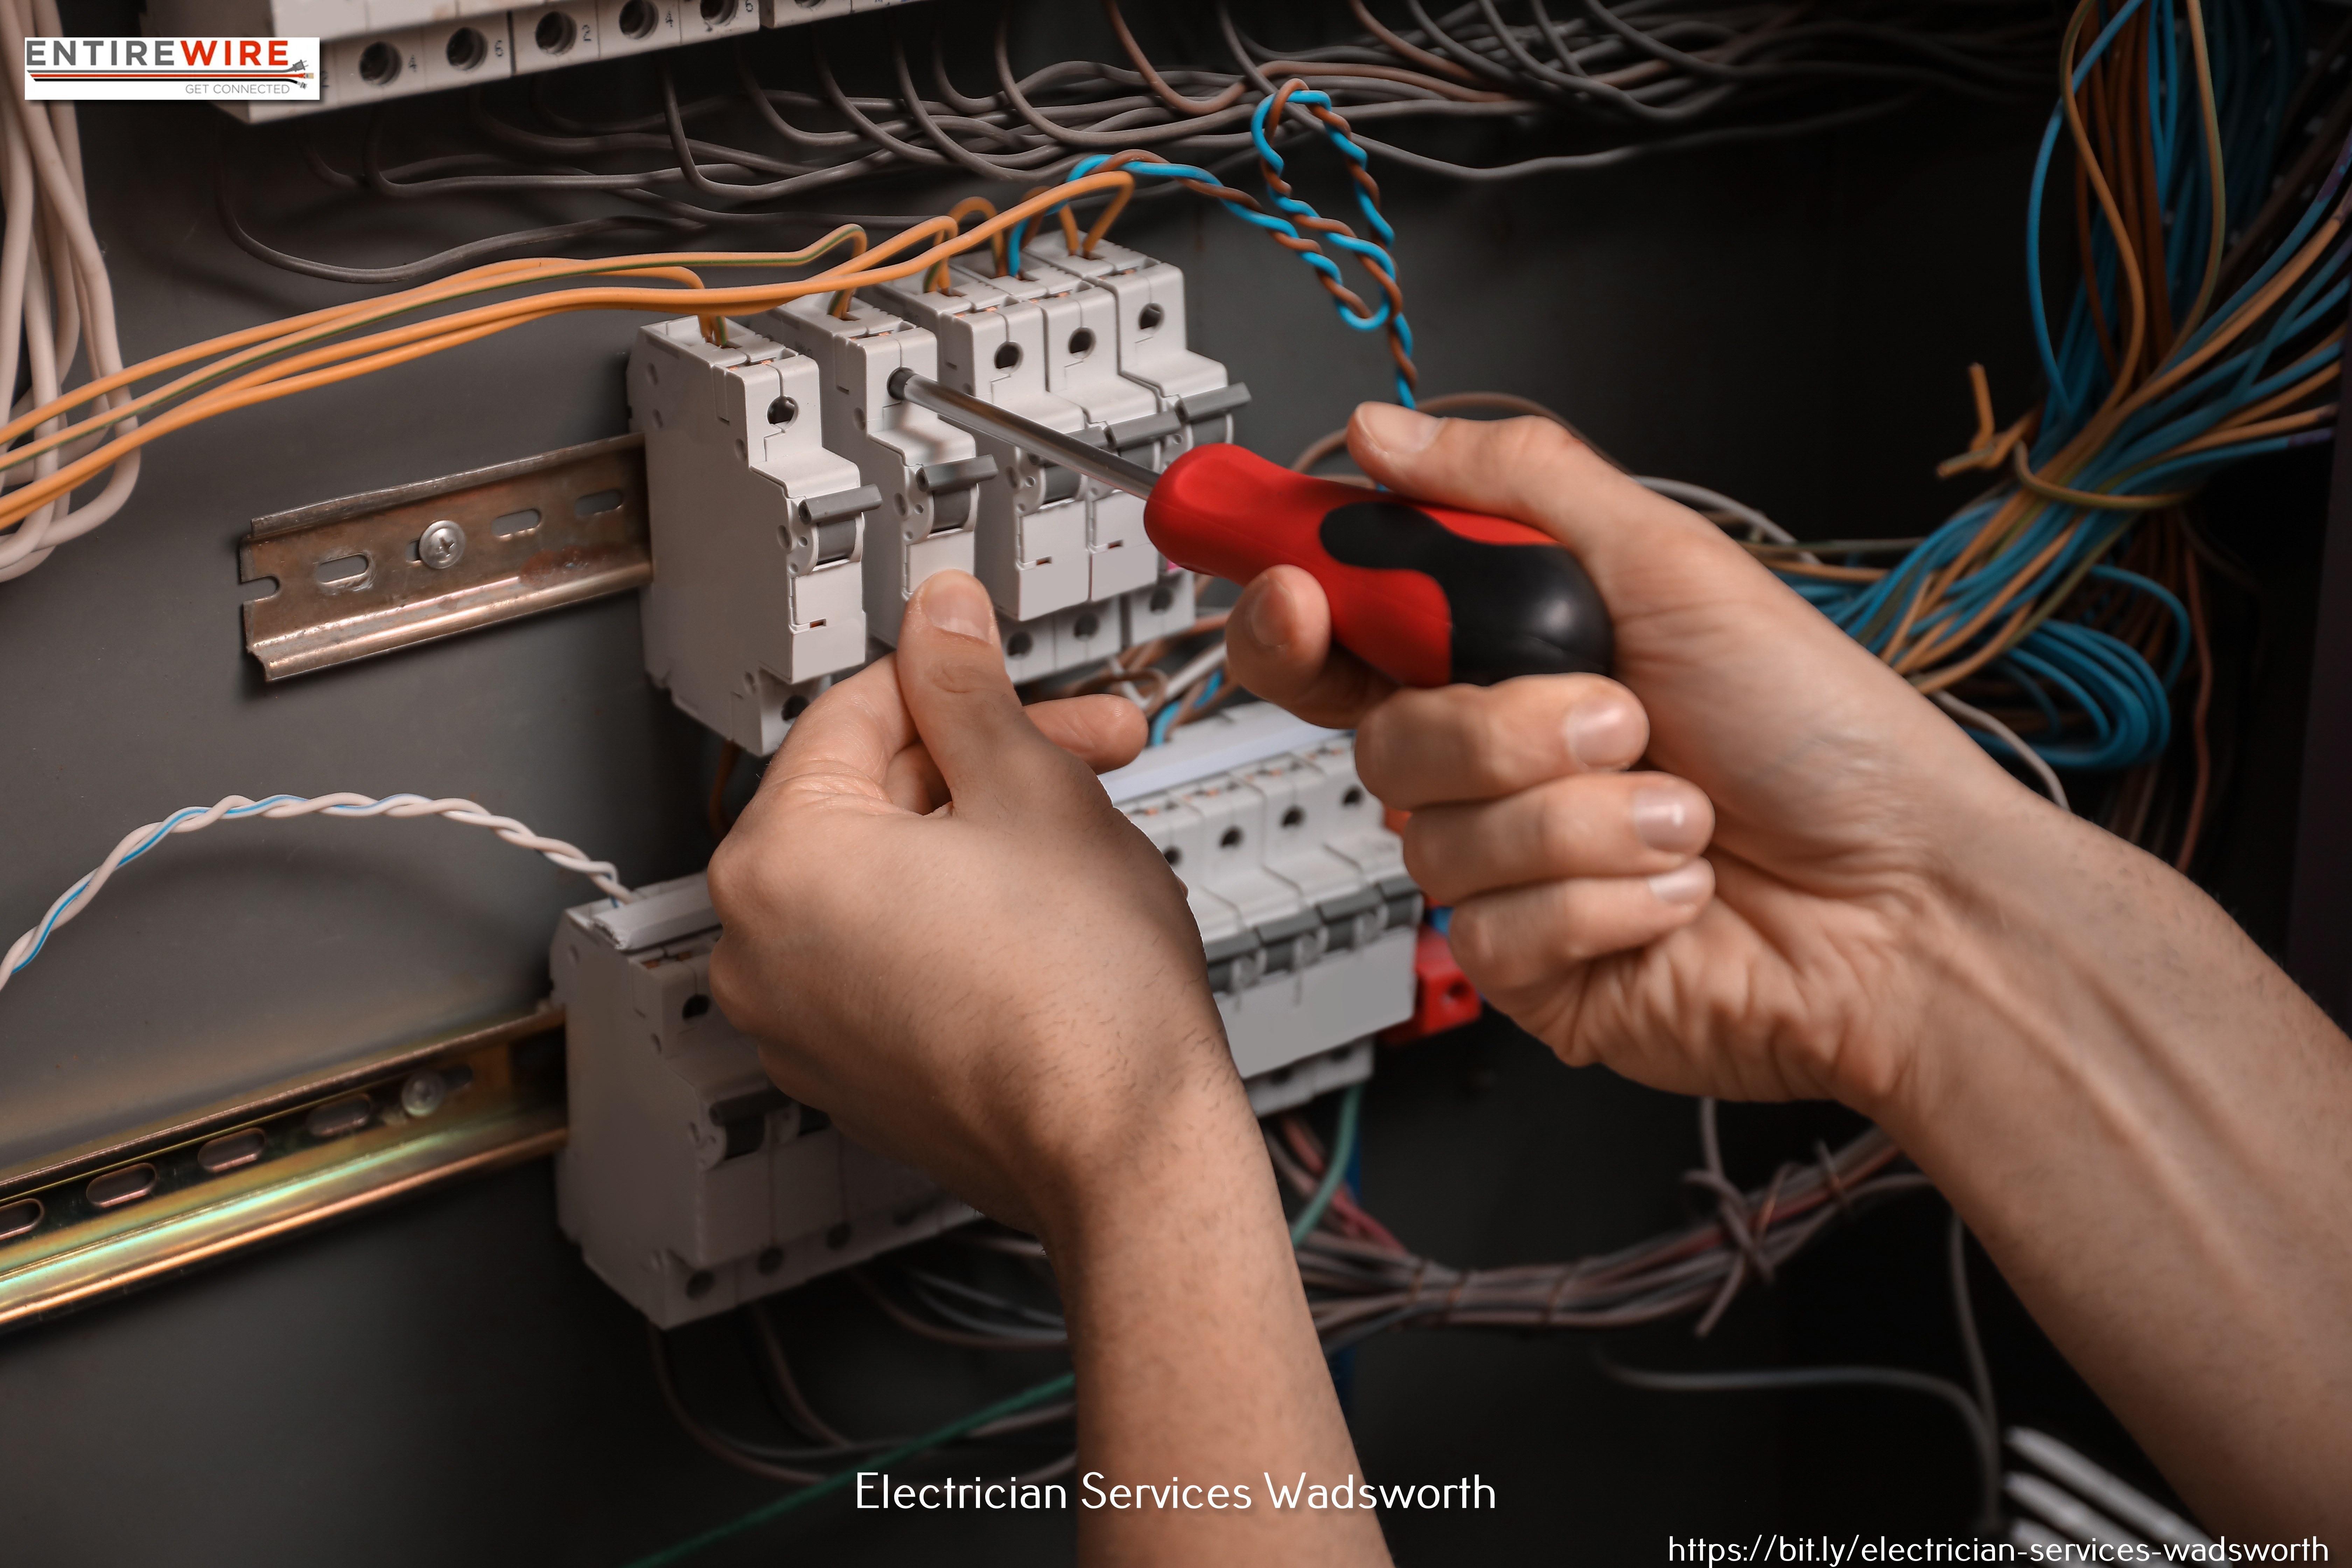 Fast and reliable residential and commercial properties electrical service with Entirewire Inc